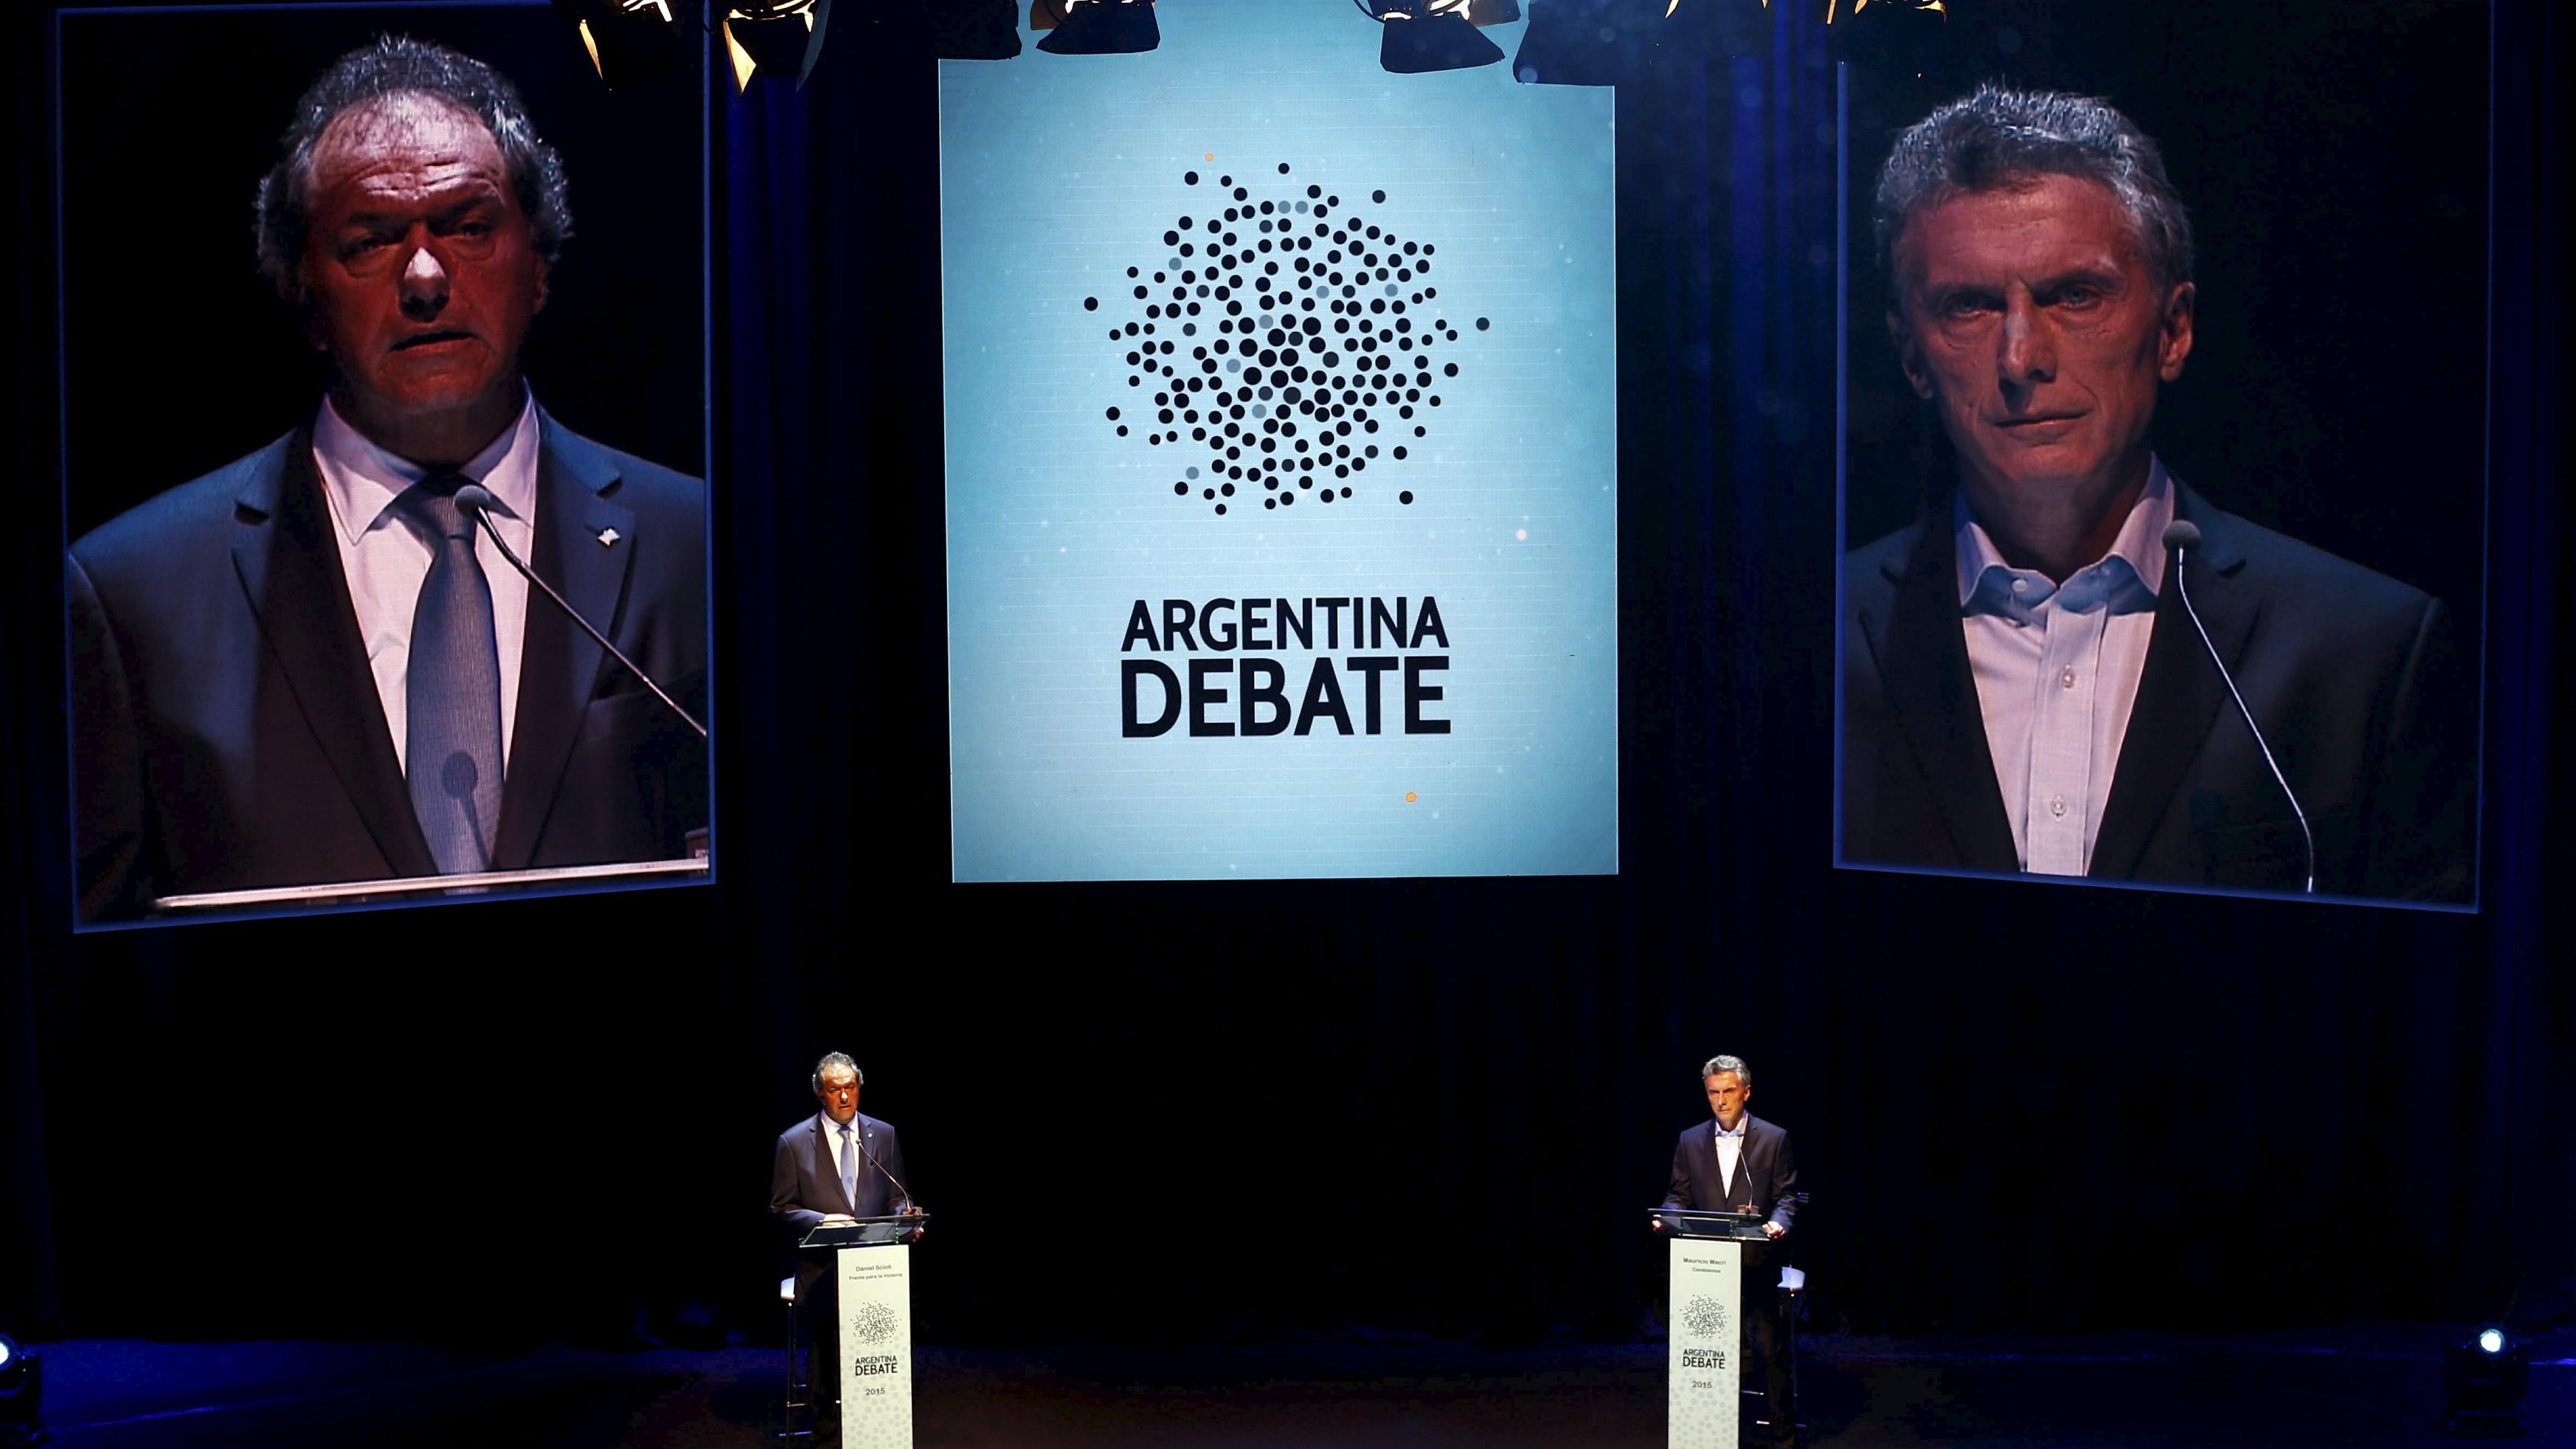 Argentina's ruling party candidate Daniel Scioli (L) and his opponent, Mauricio Macri (R), during the presidential debate ahead of the Nov. 22 runoff election.